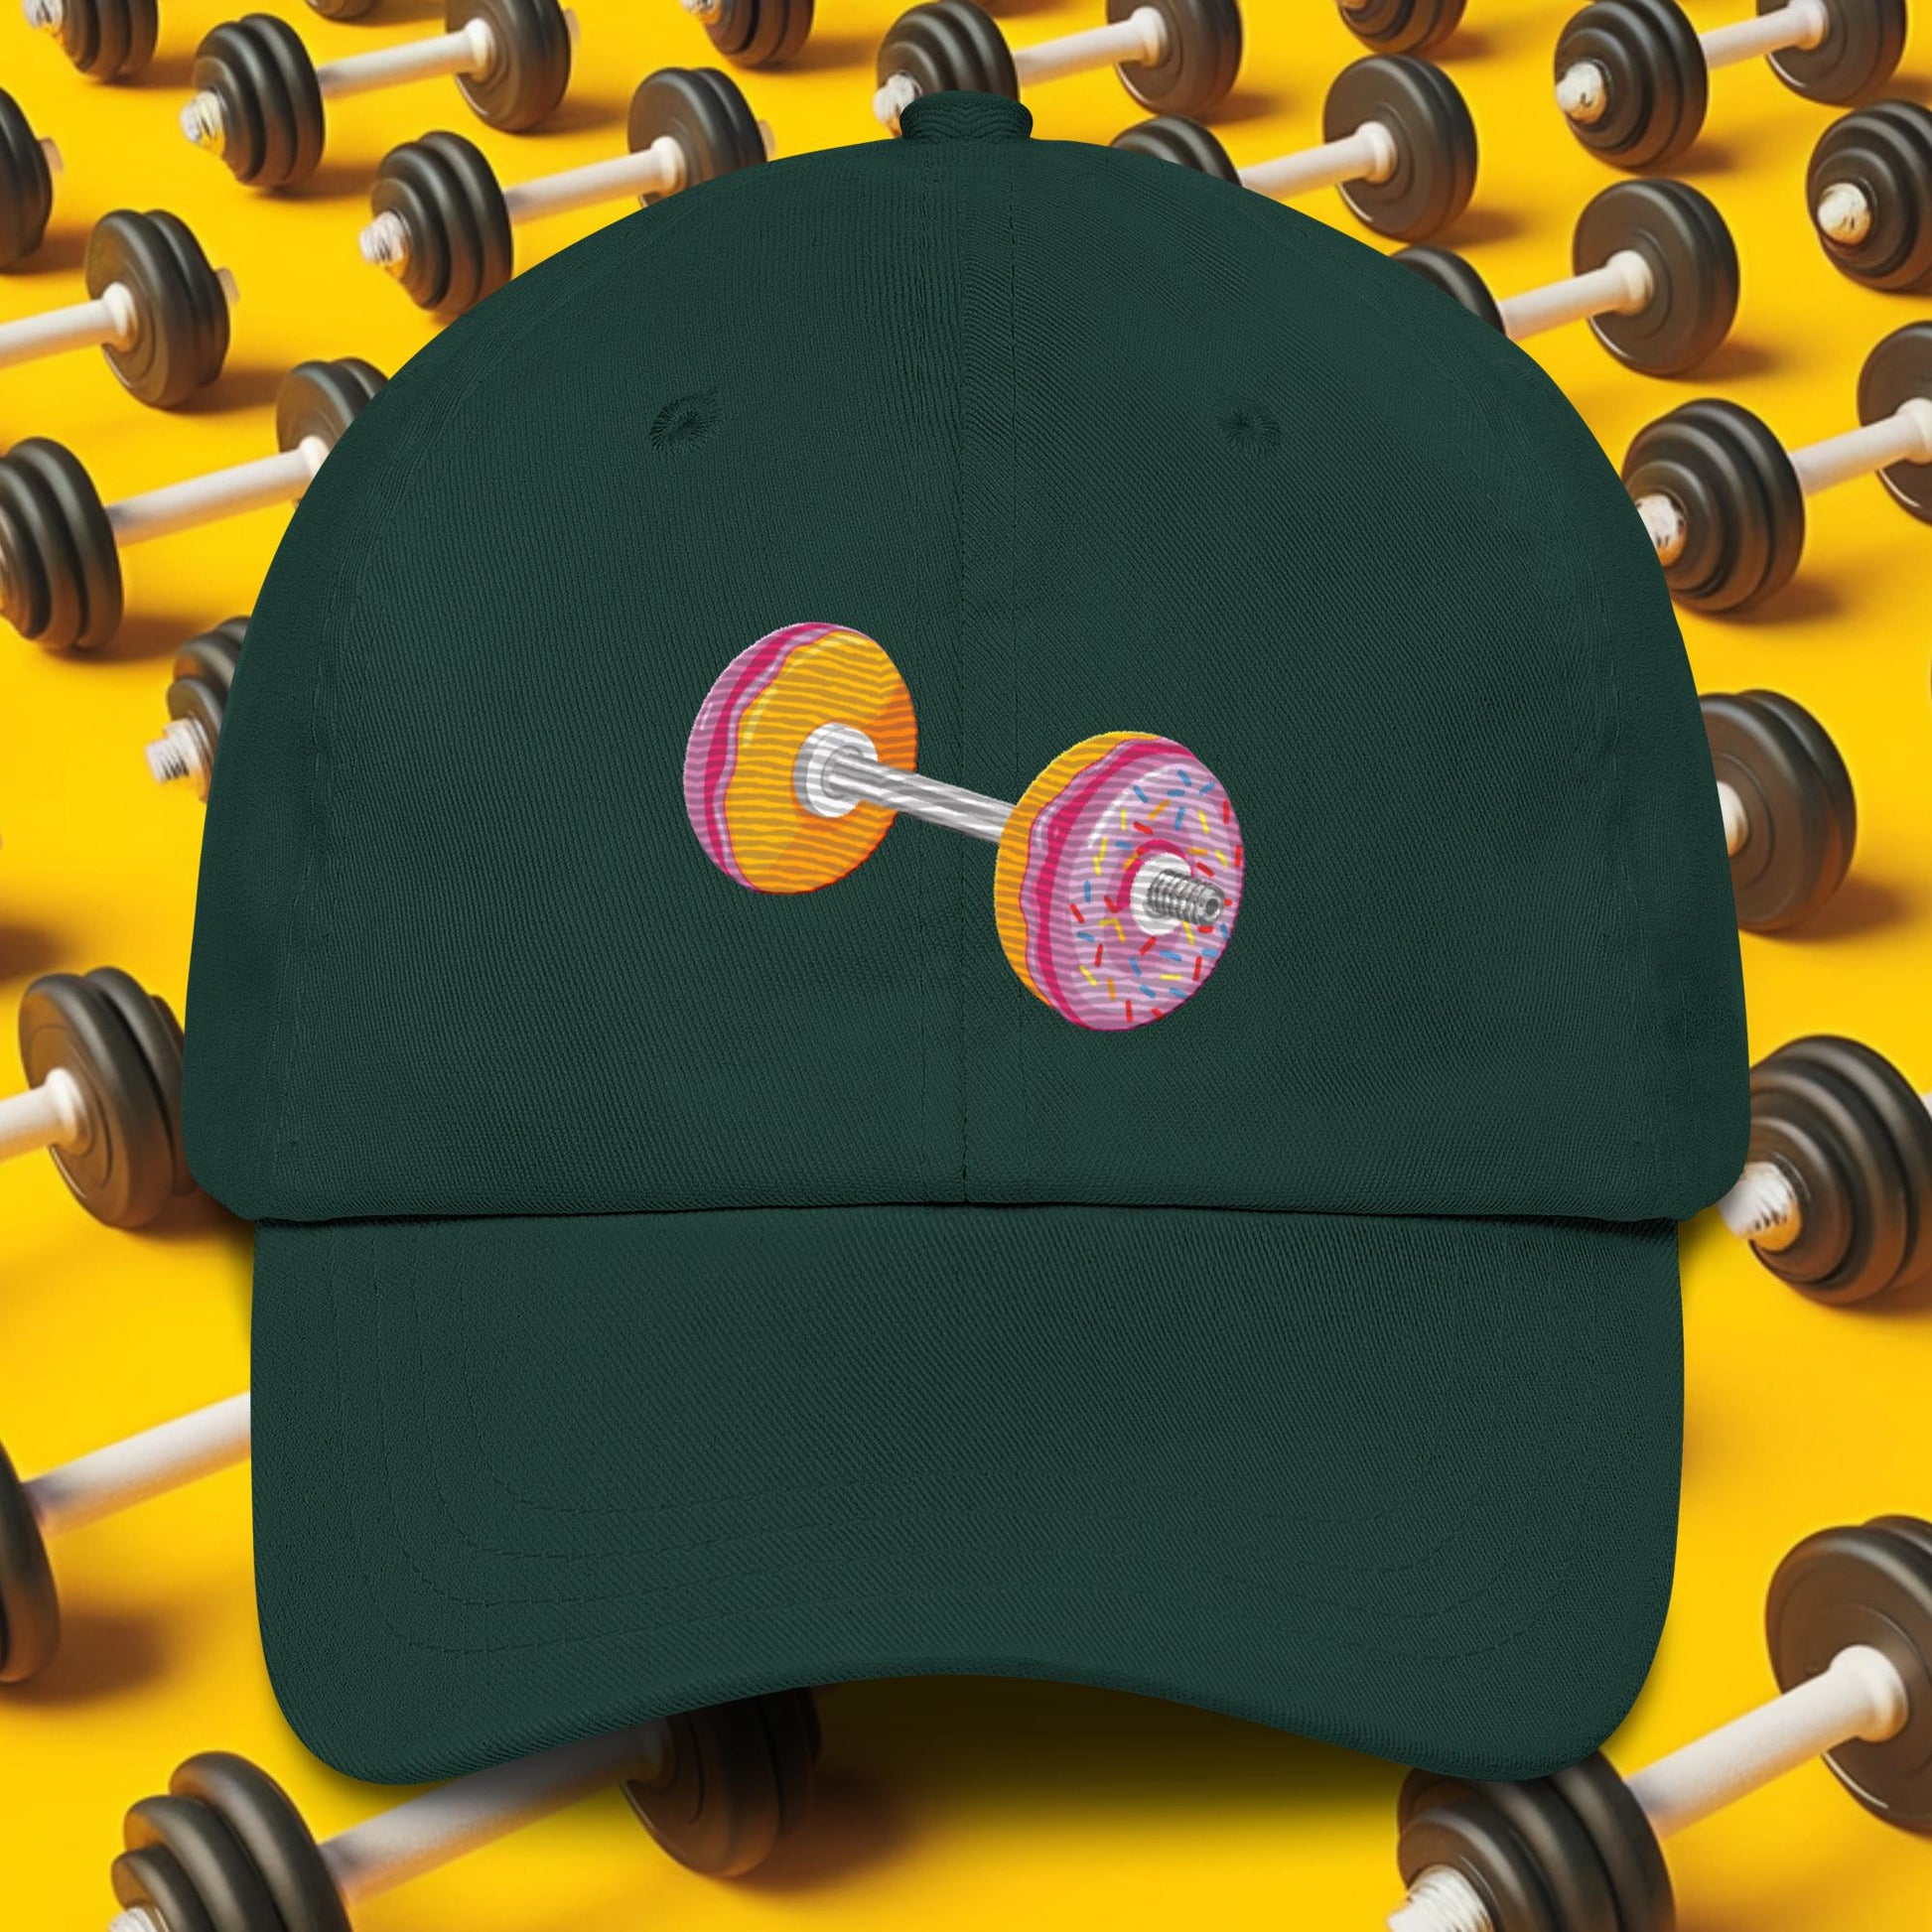 Donut Dumbbell Donuts Barbell Funny Bulk Diet Gym Workout Fitness Bodybuilding Dad hat Next Cult Brand